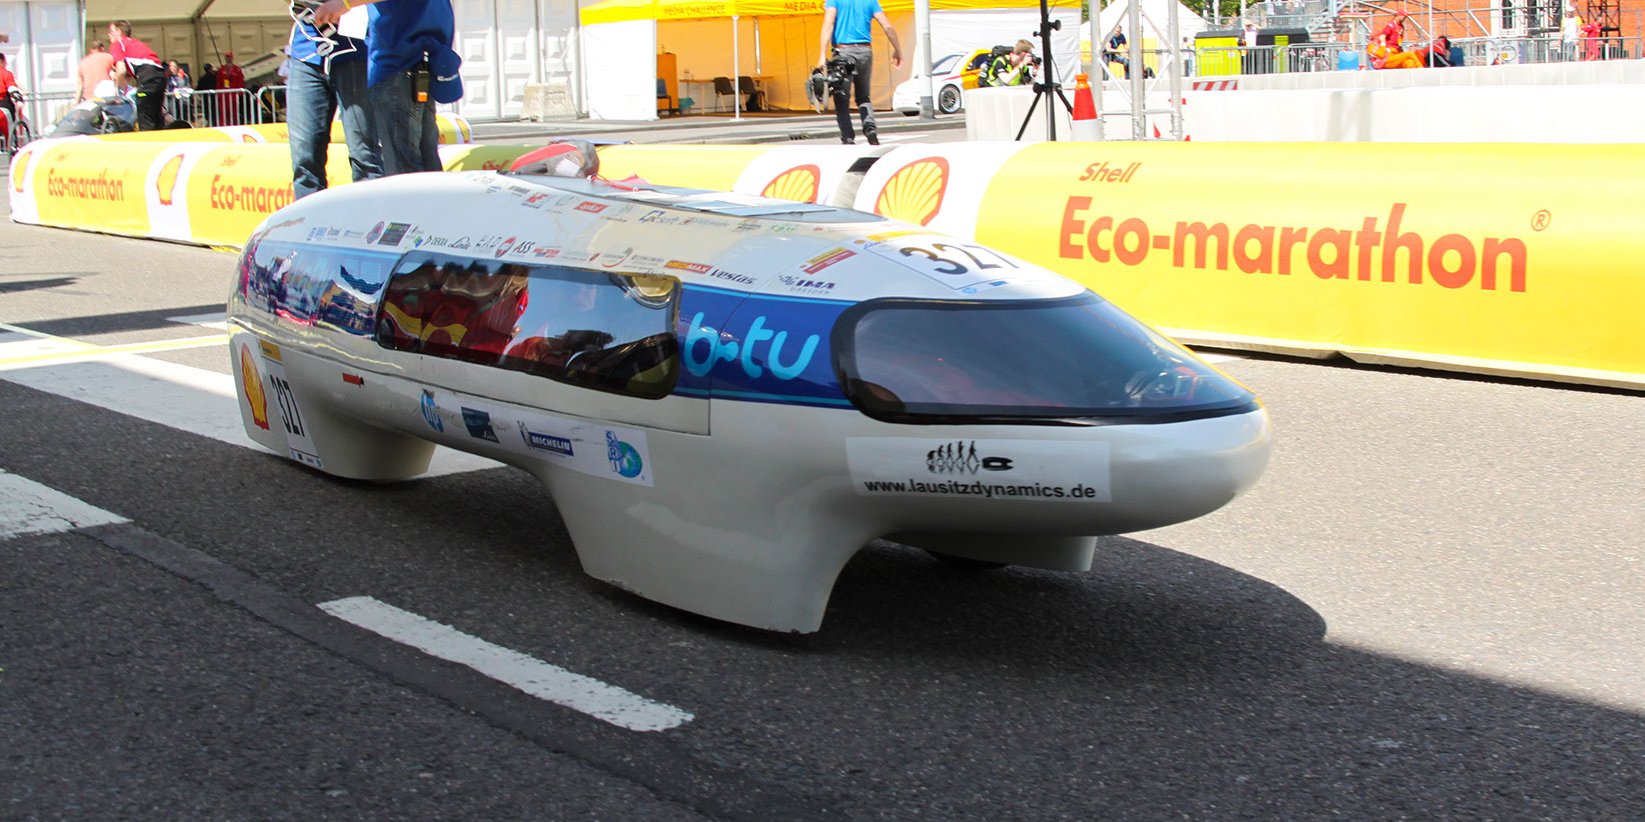 Energy-saving mobile LaDy on the course of the Shell ecomarathon as a showcase of a student project in the mechanical engineering course